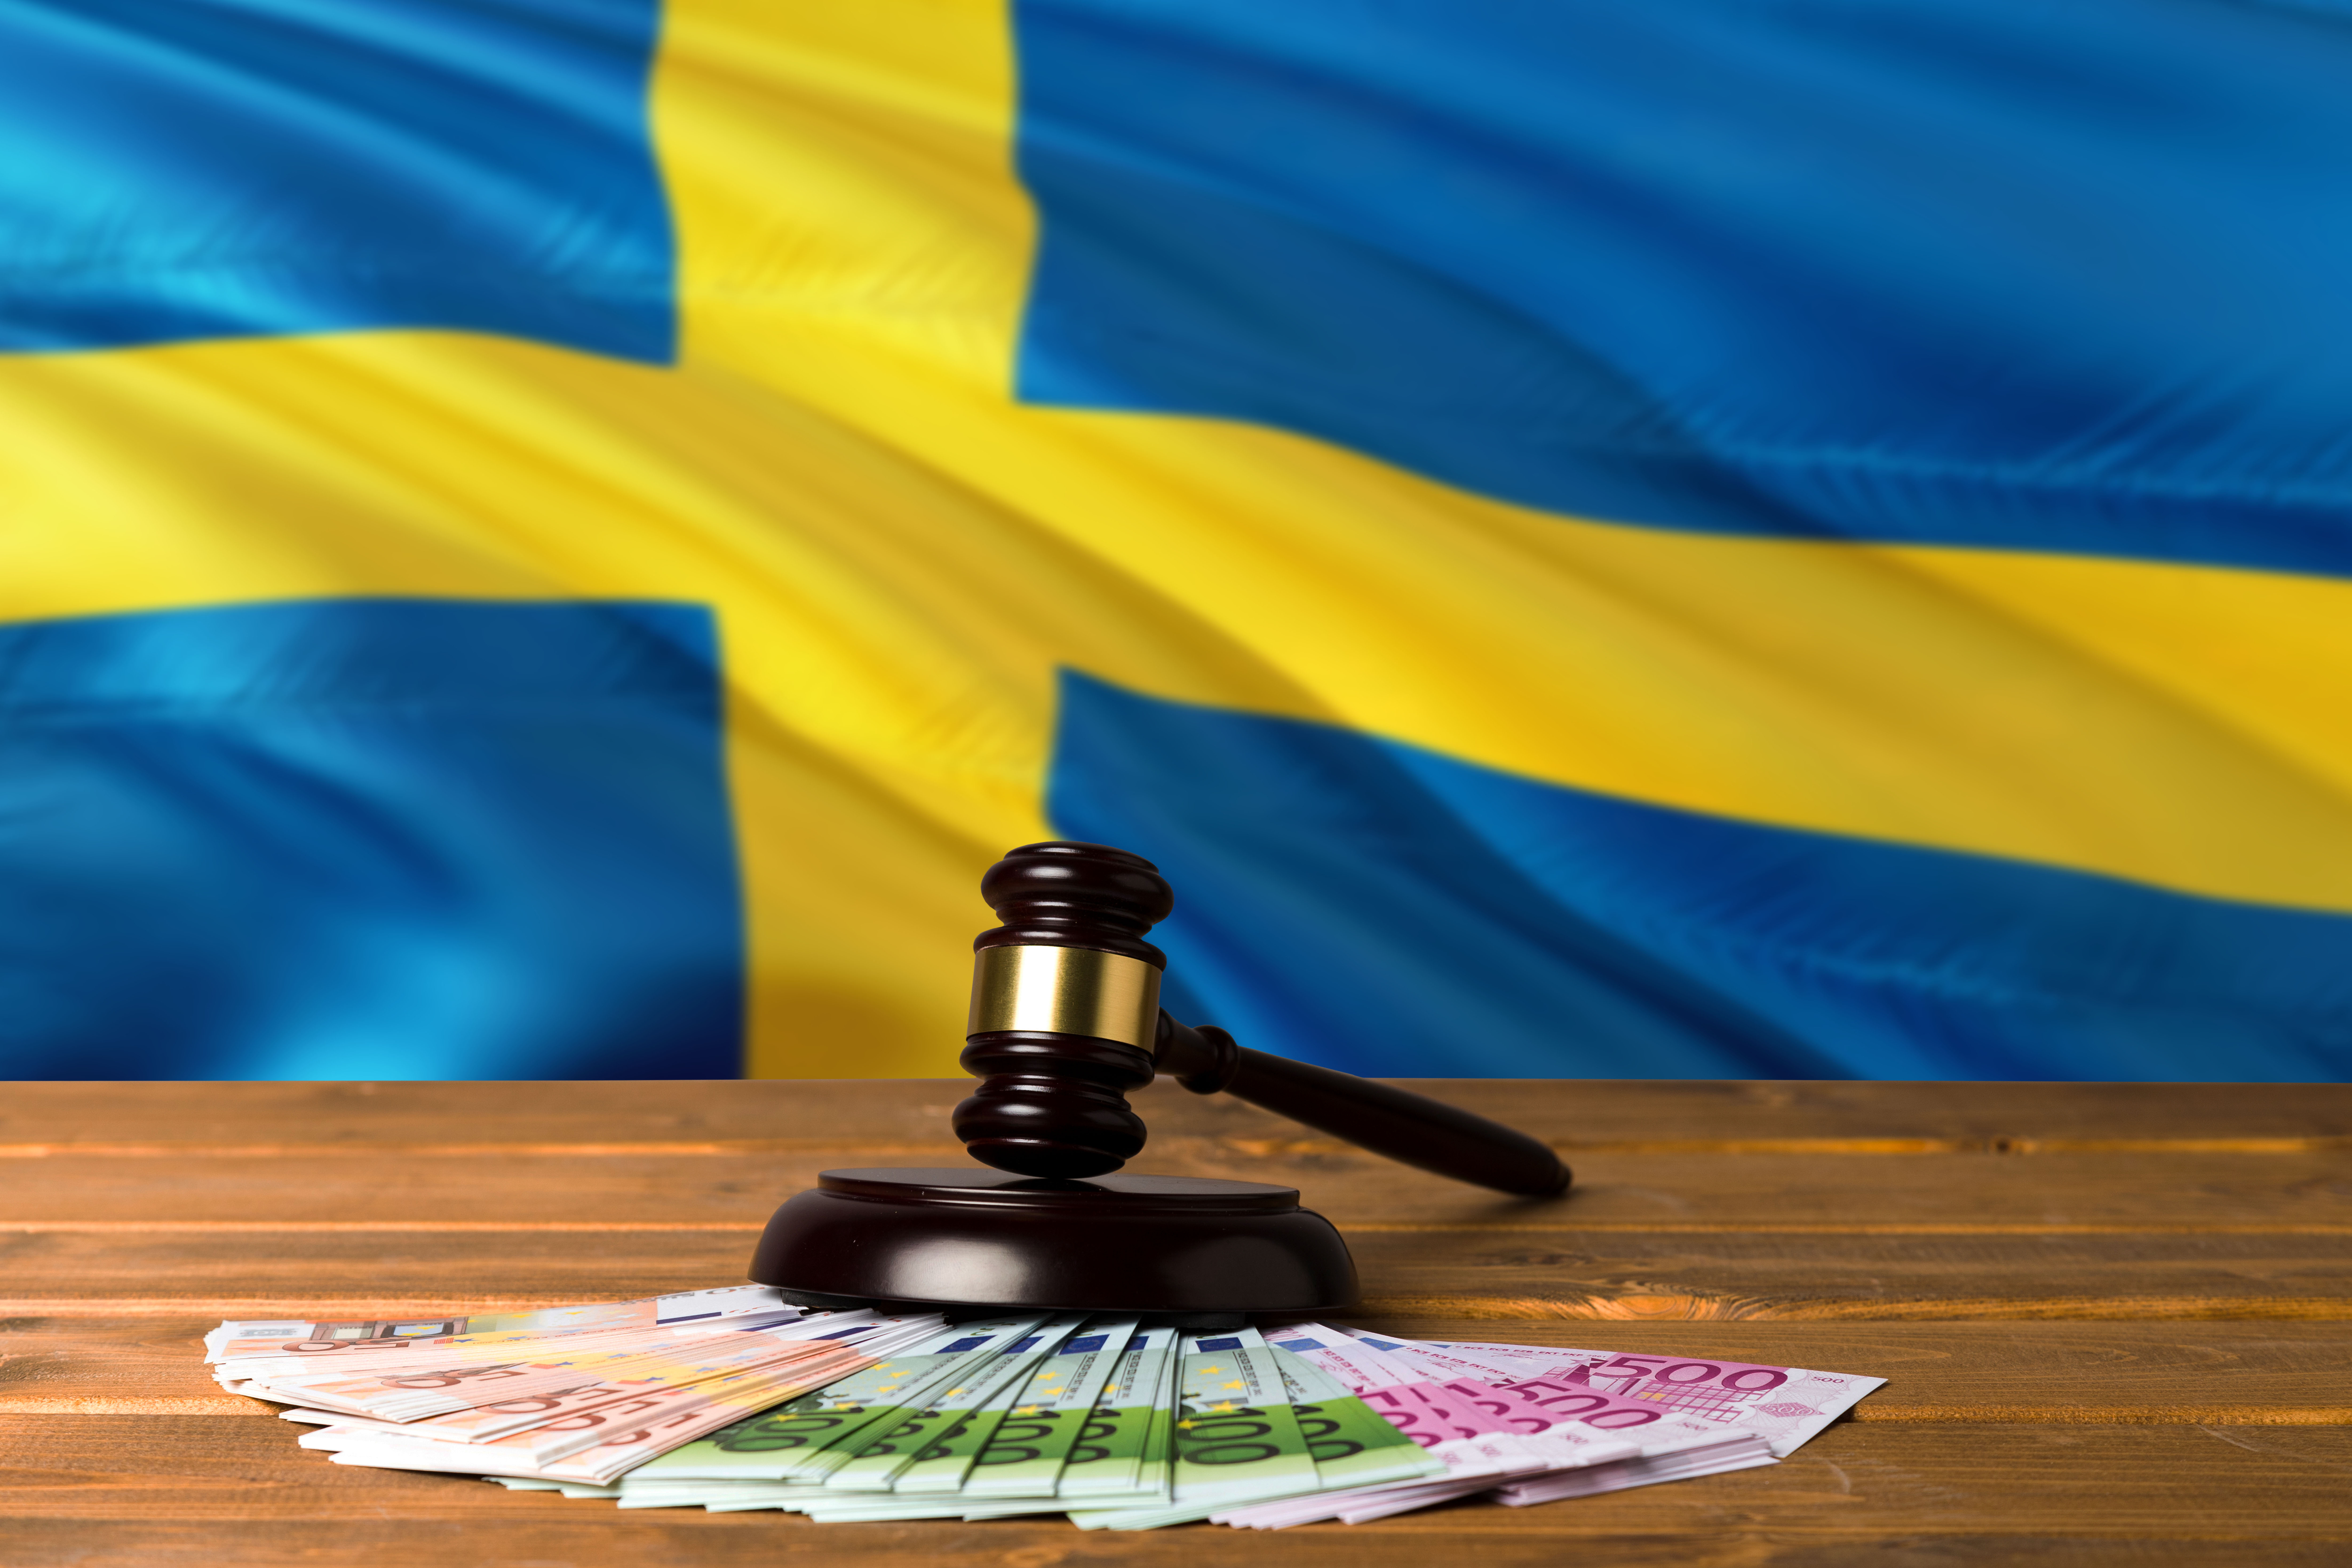 GASA Scams in Sweden Report Paints Bleak Picture for Consumers